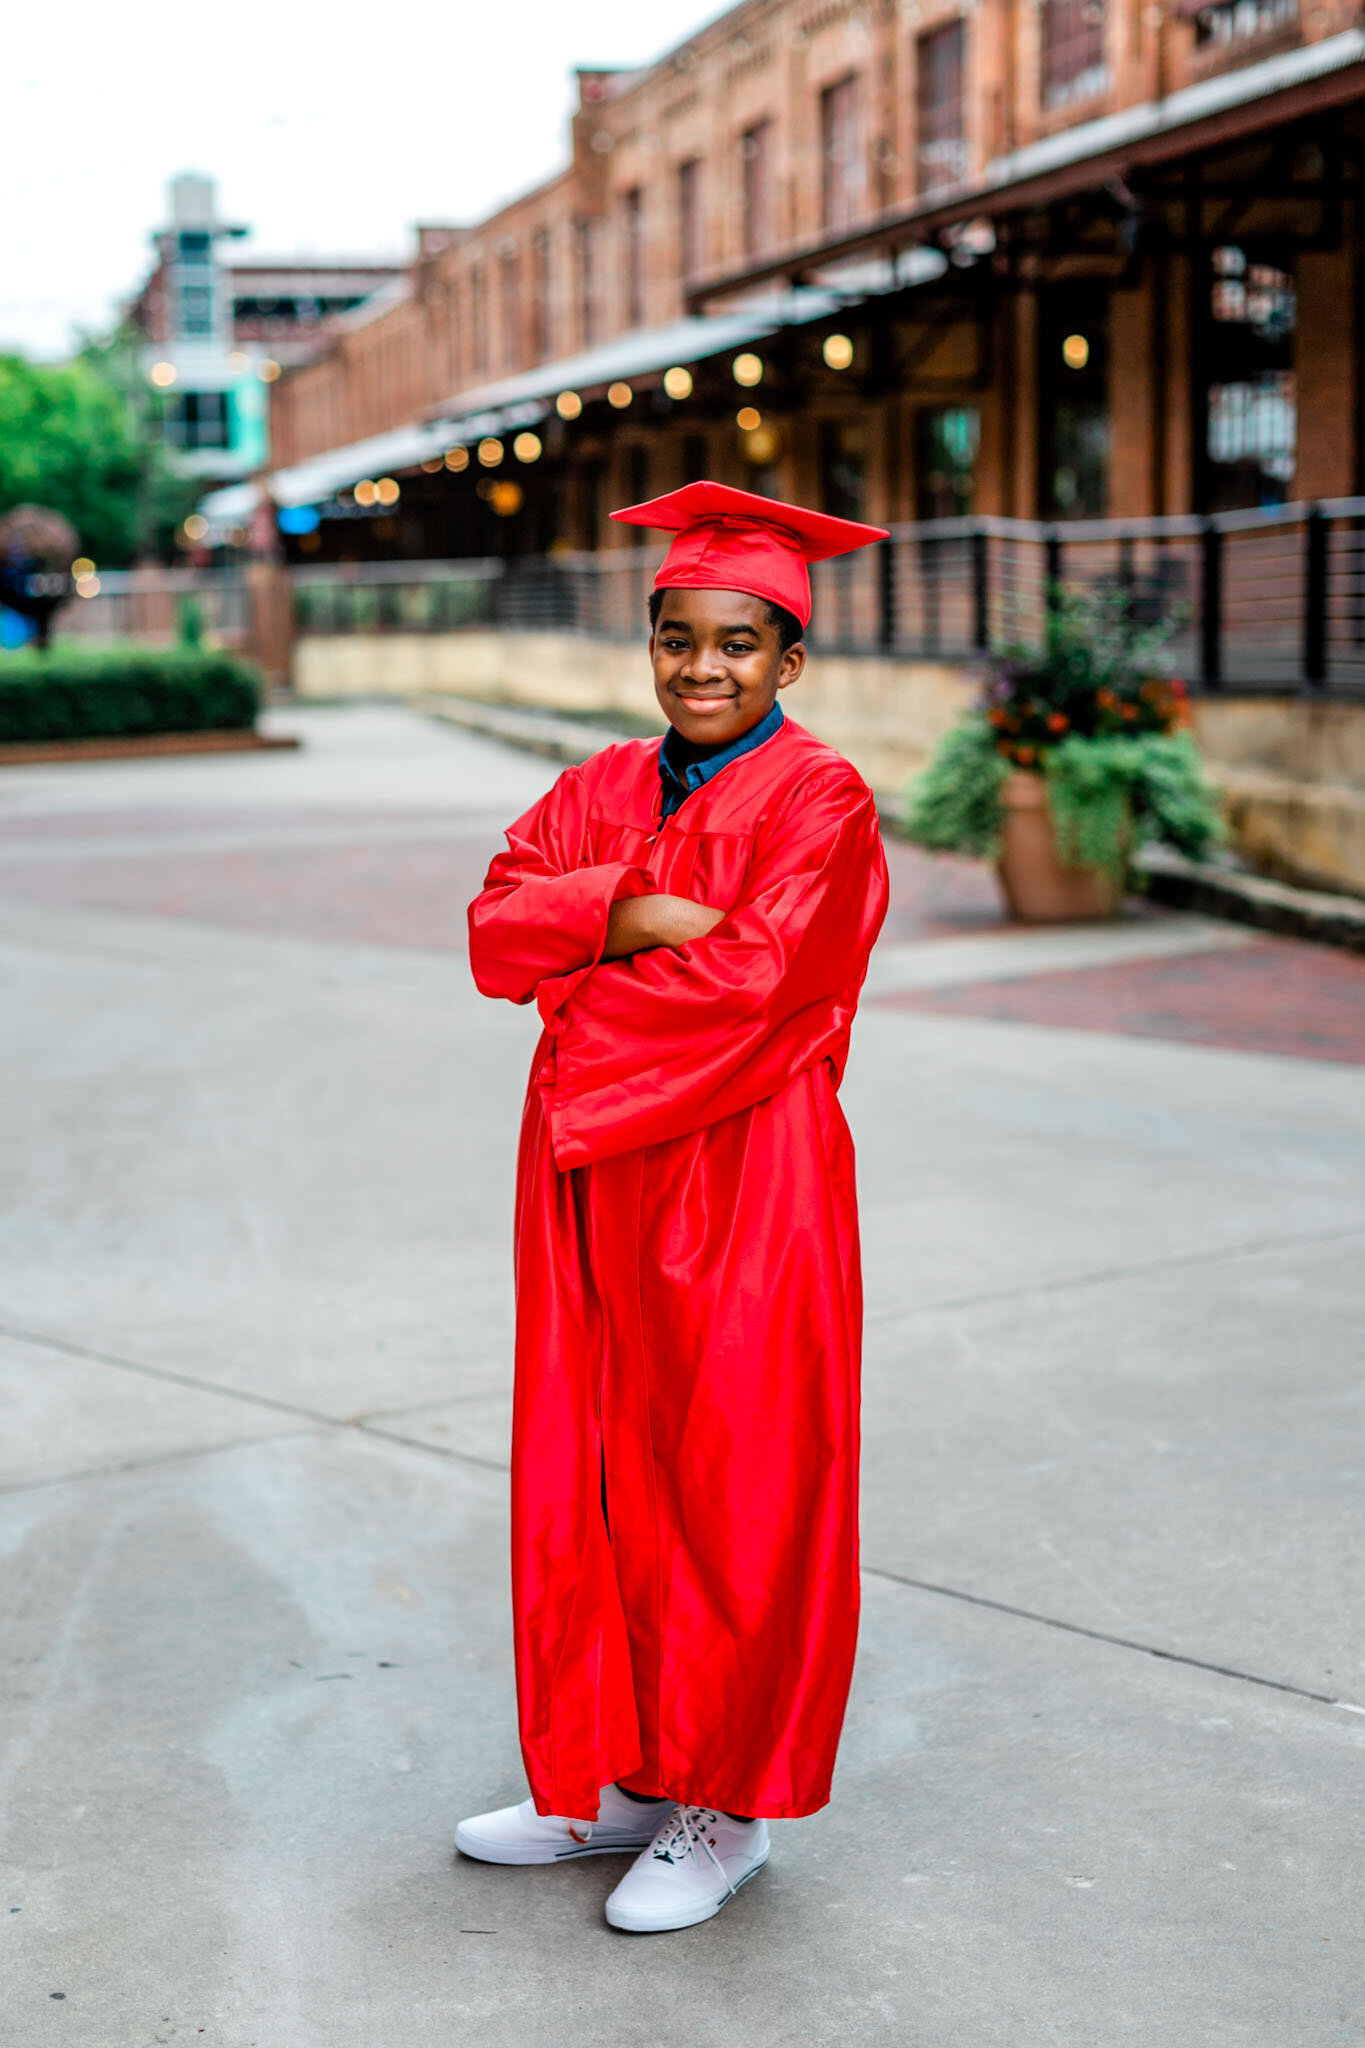 Durham Family Photographer | By G. Lin Photography | Portrait of young boy in graduation red gown